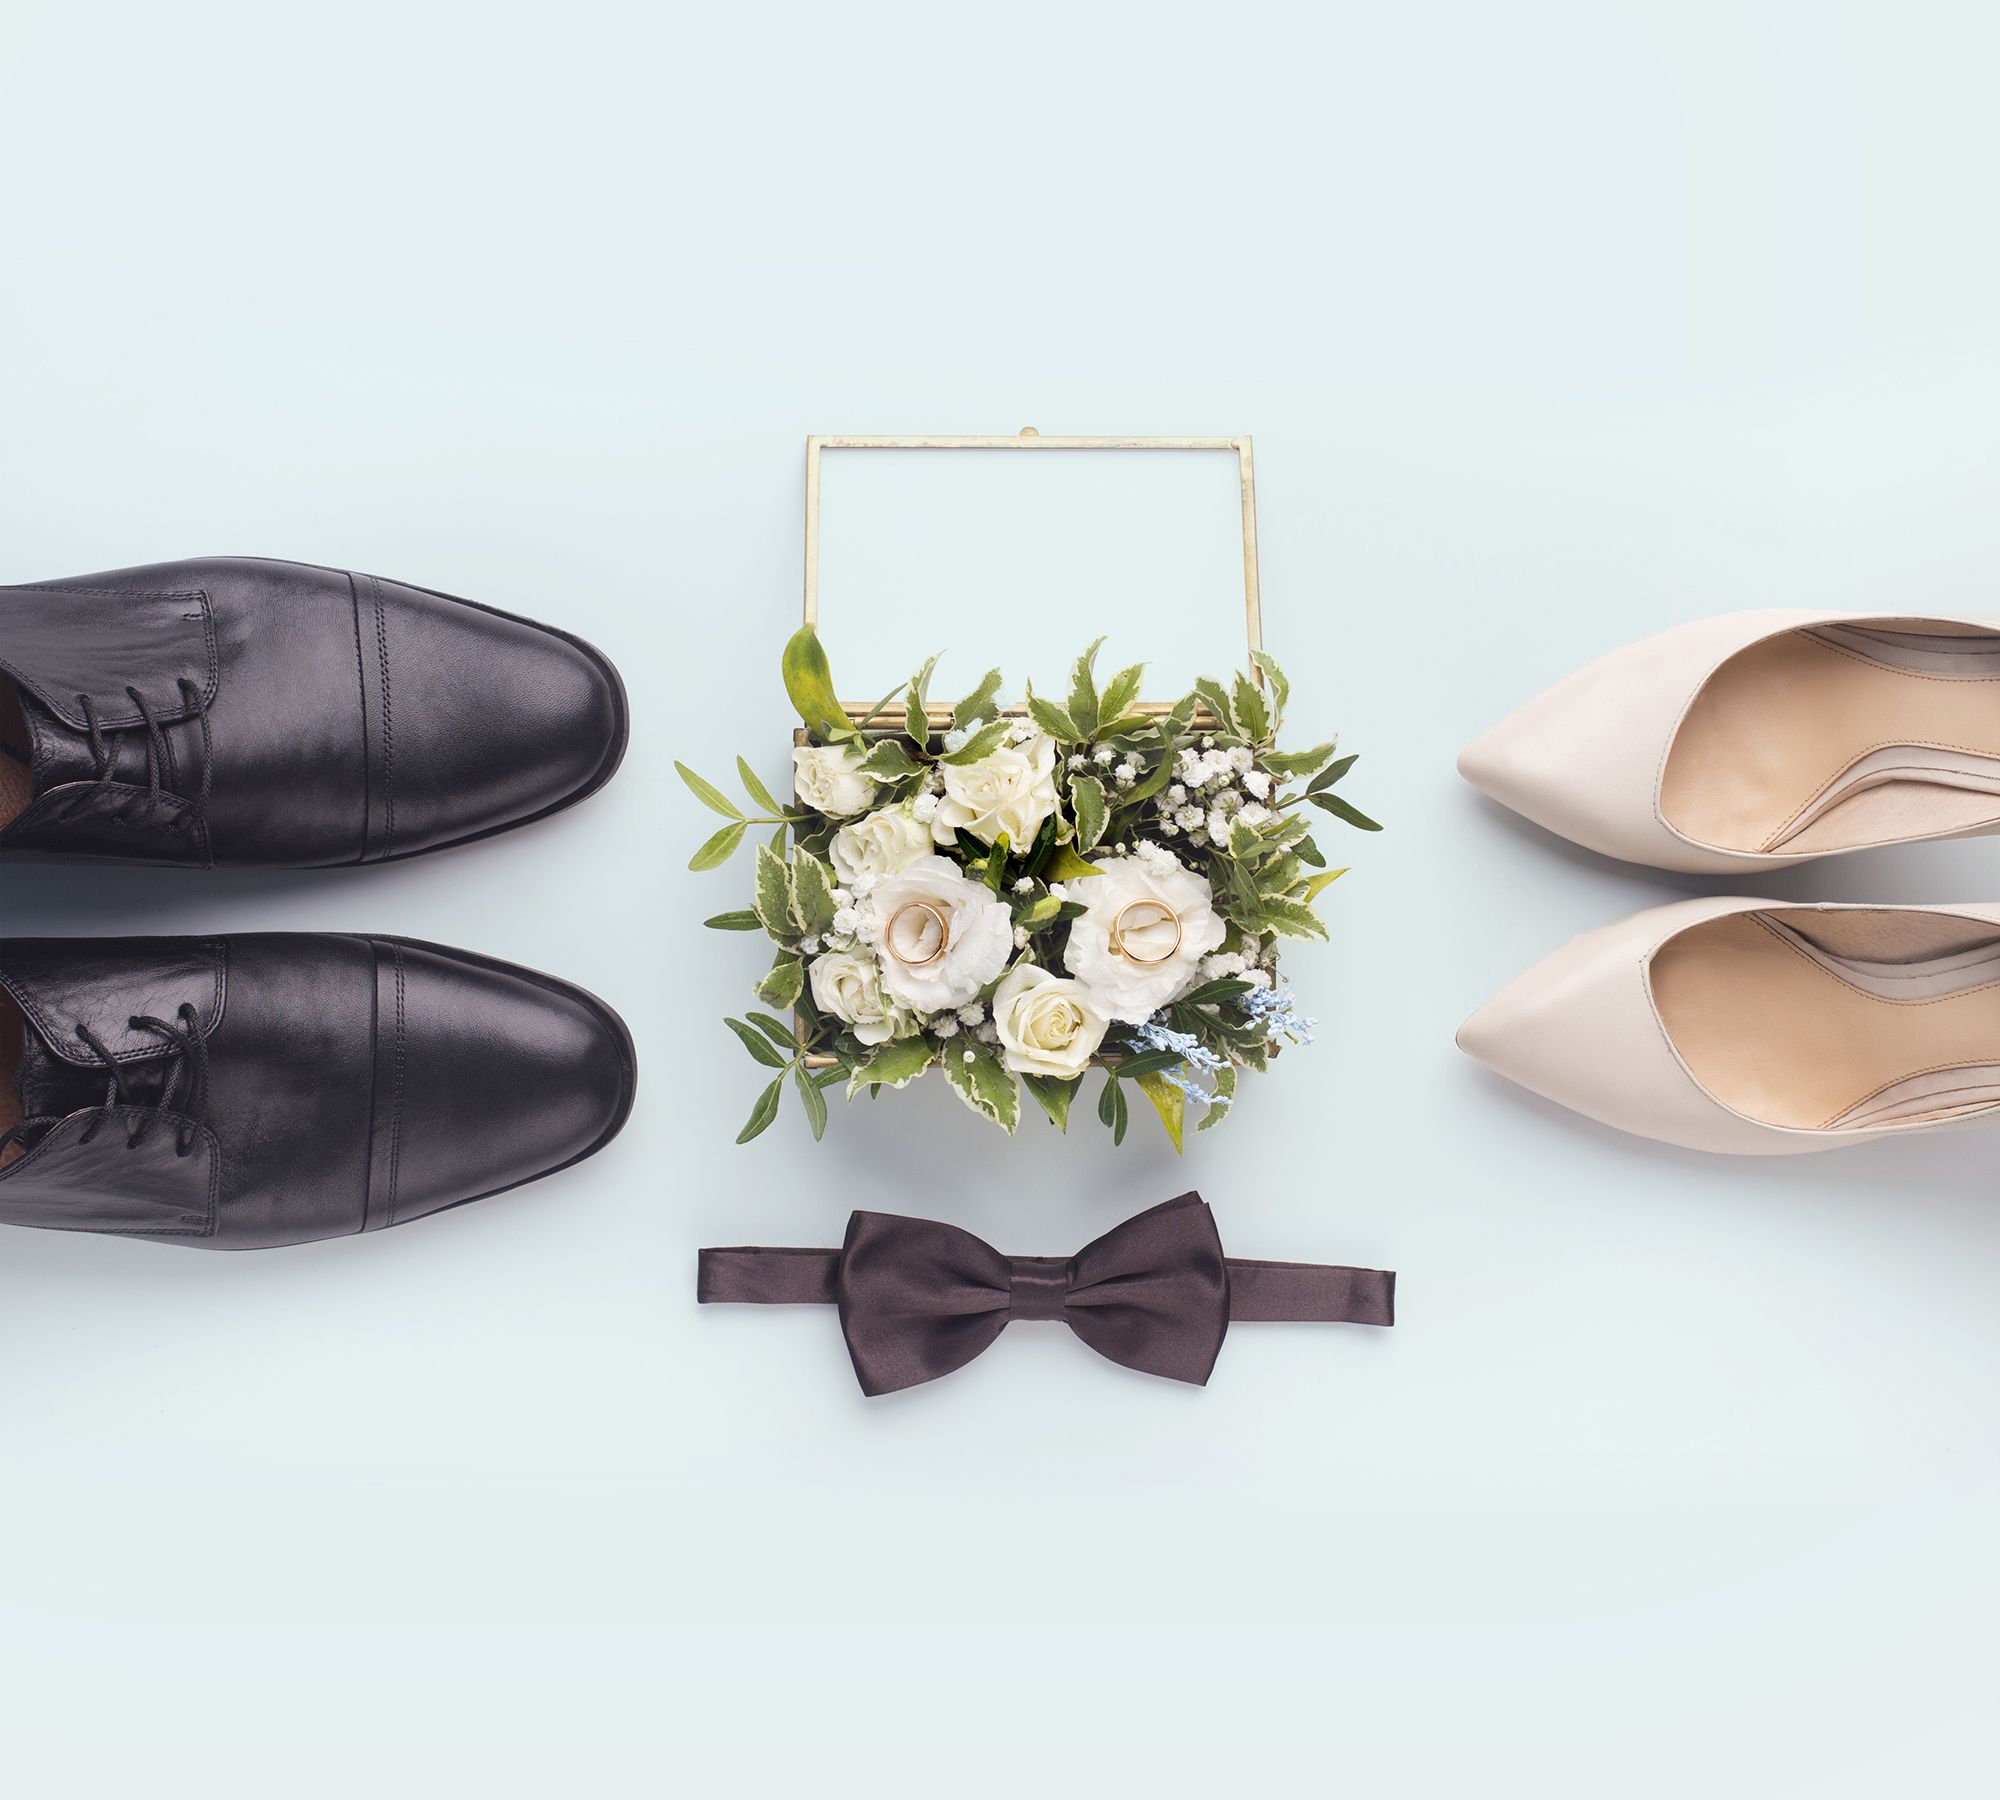 Grooms, It's Time to Step Up and Get Involved in Wedding Planning